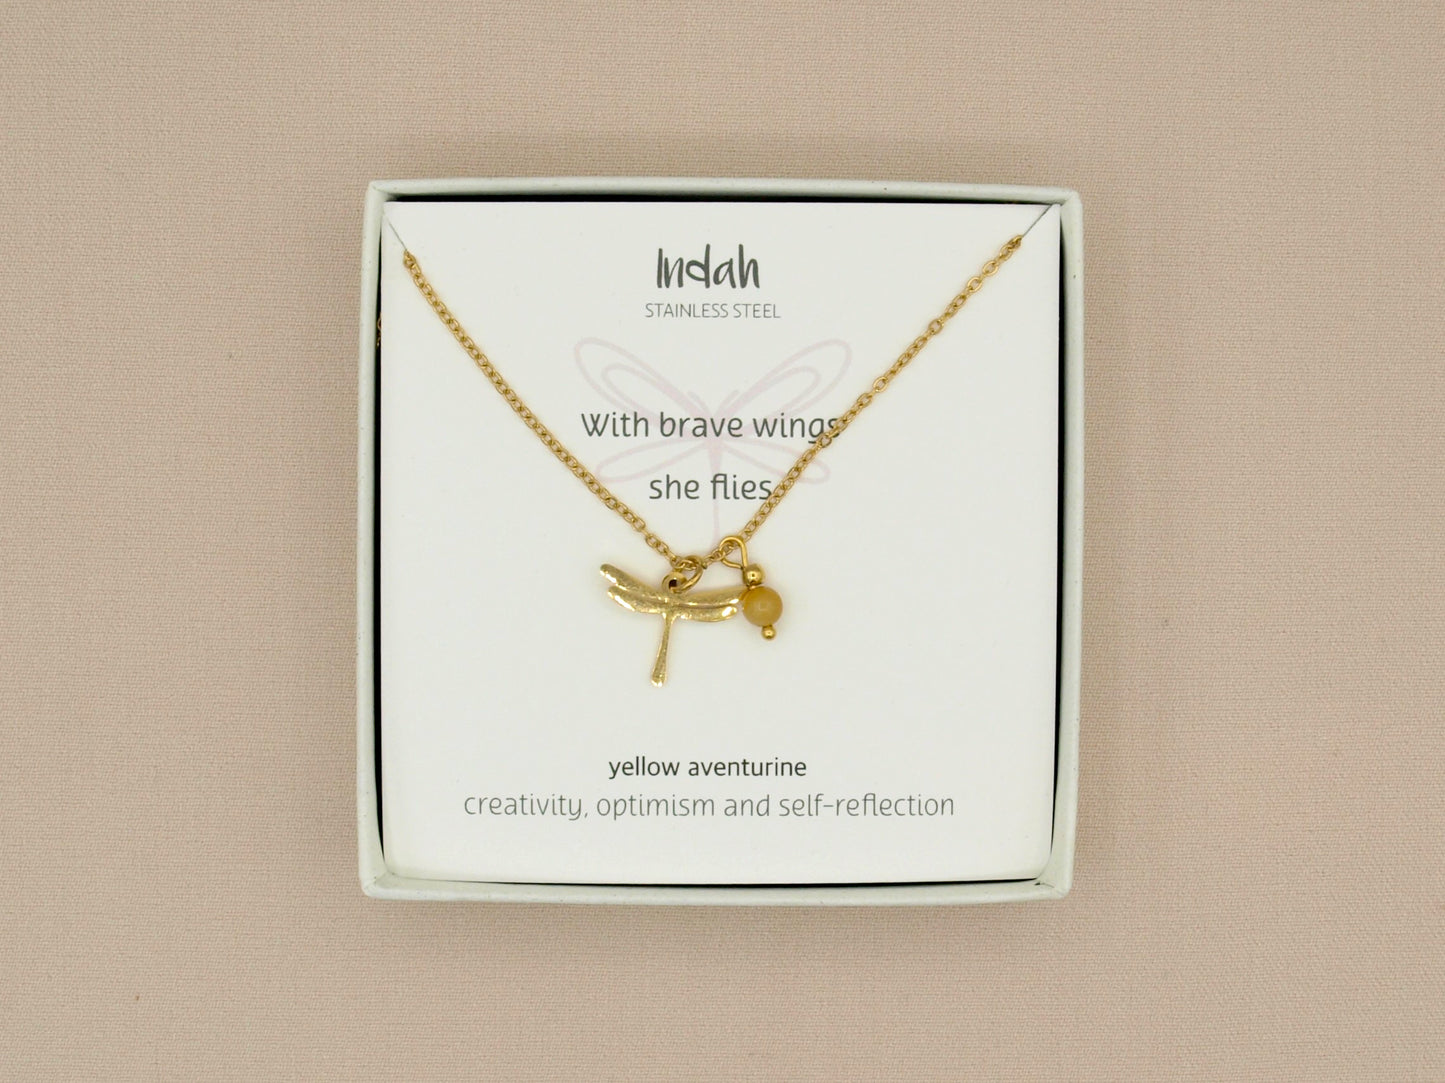 Necklace rock, dragonfly-yellow aventurine, silver and gold stainless steel